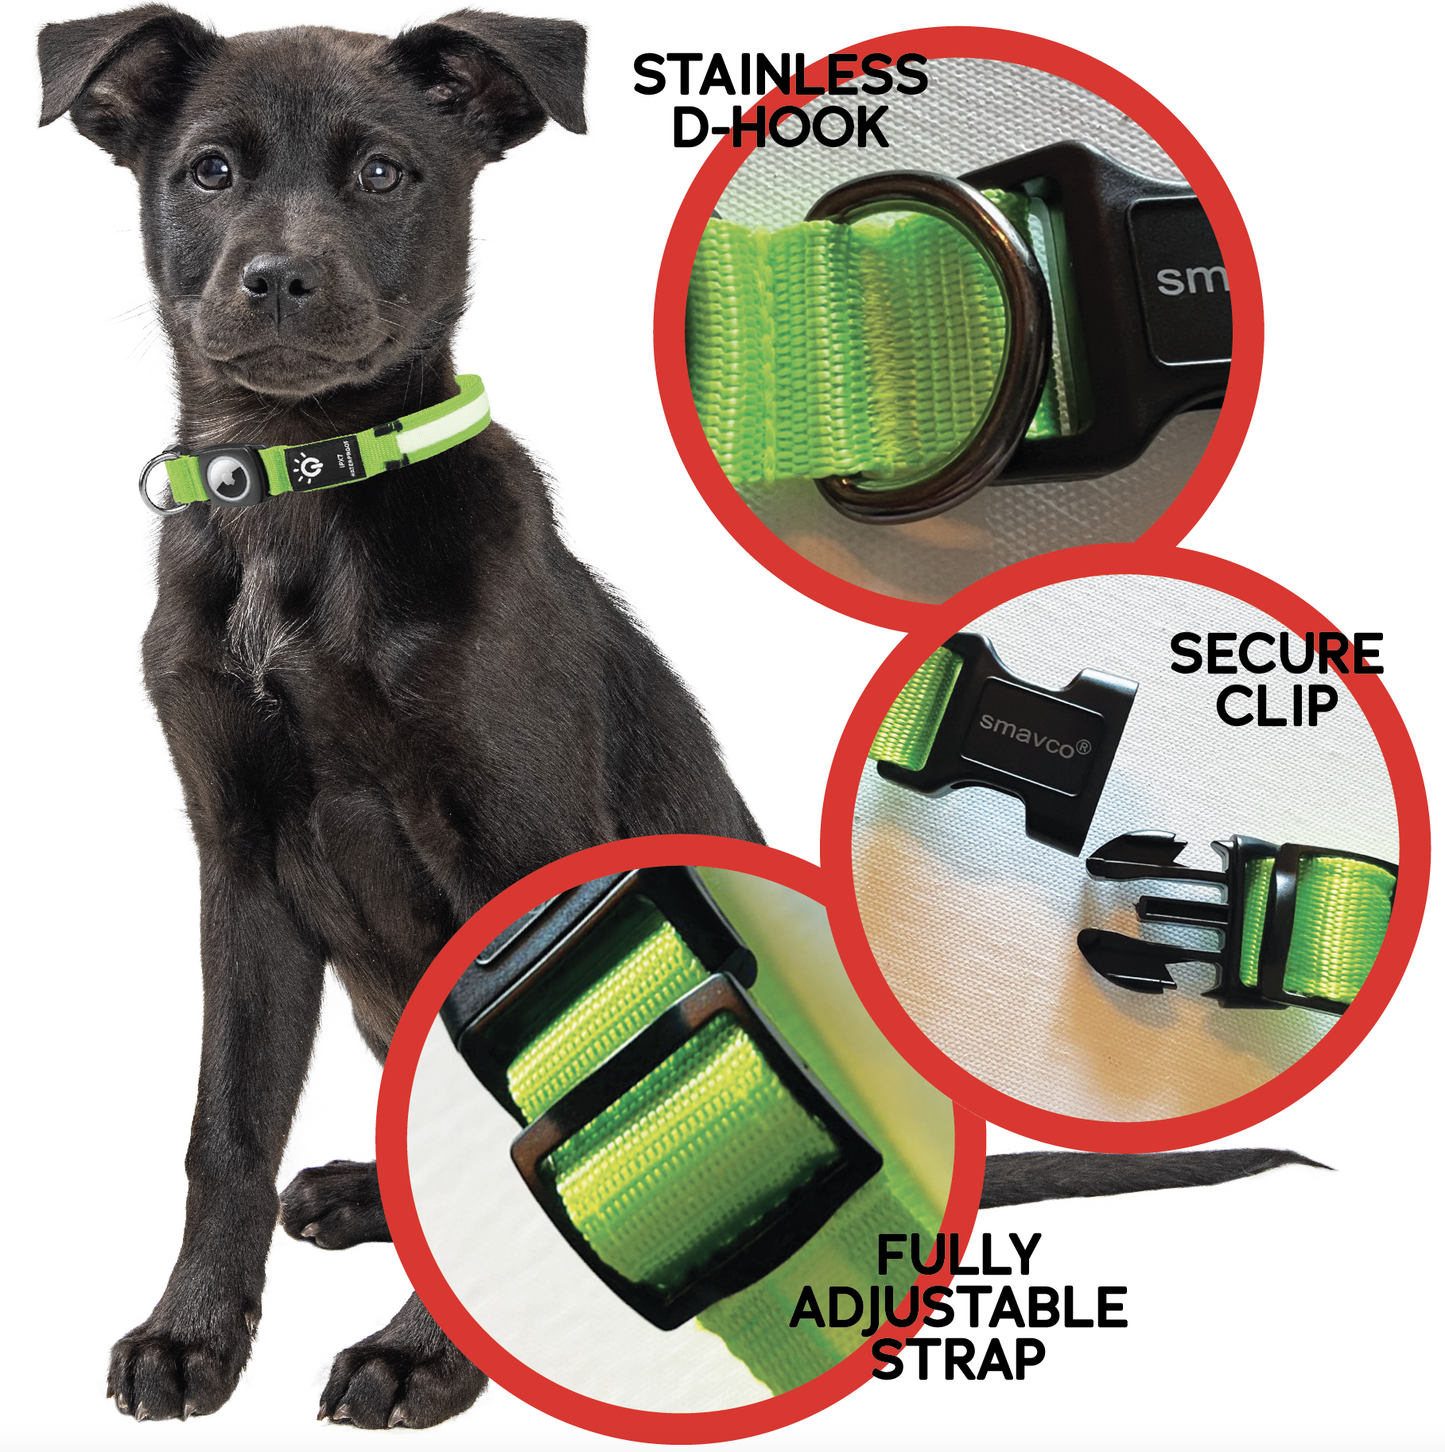 SMAVCO Airtag Holder LED Dog Collar Rechargeable, Waterproof, Adjustable, Soft, Reflective with USB Car & Wall Charger - Blue-SMAVtronics